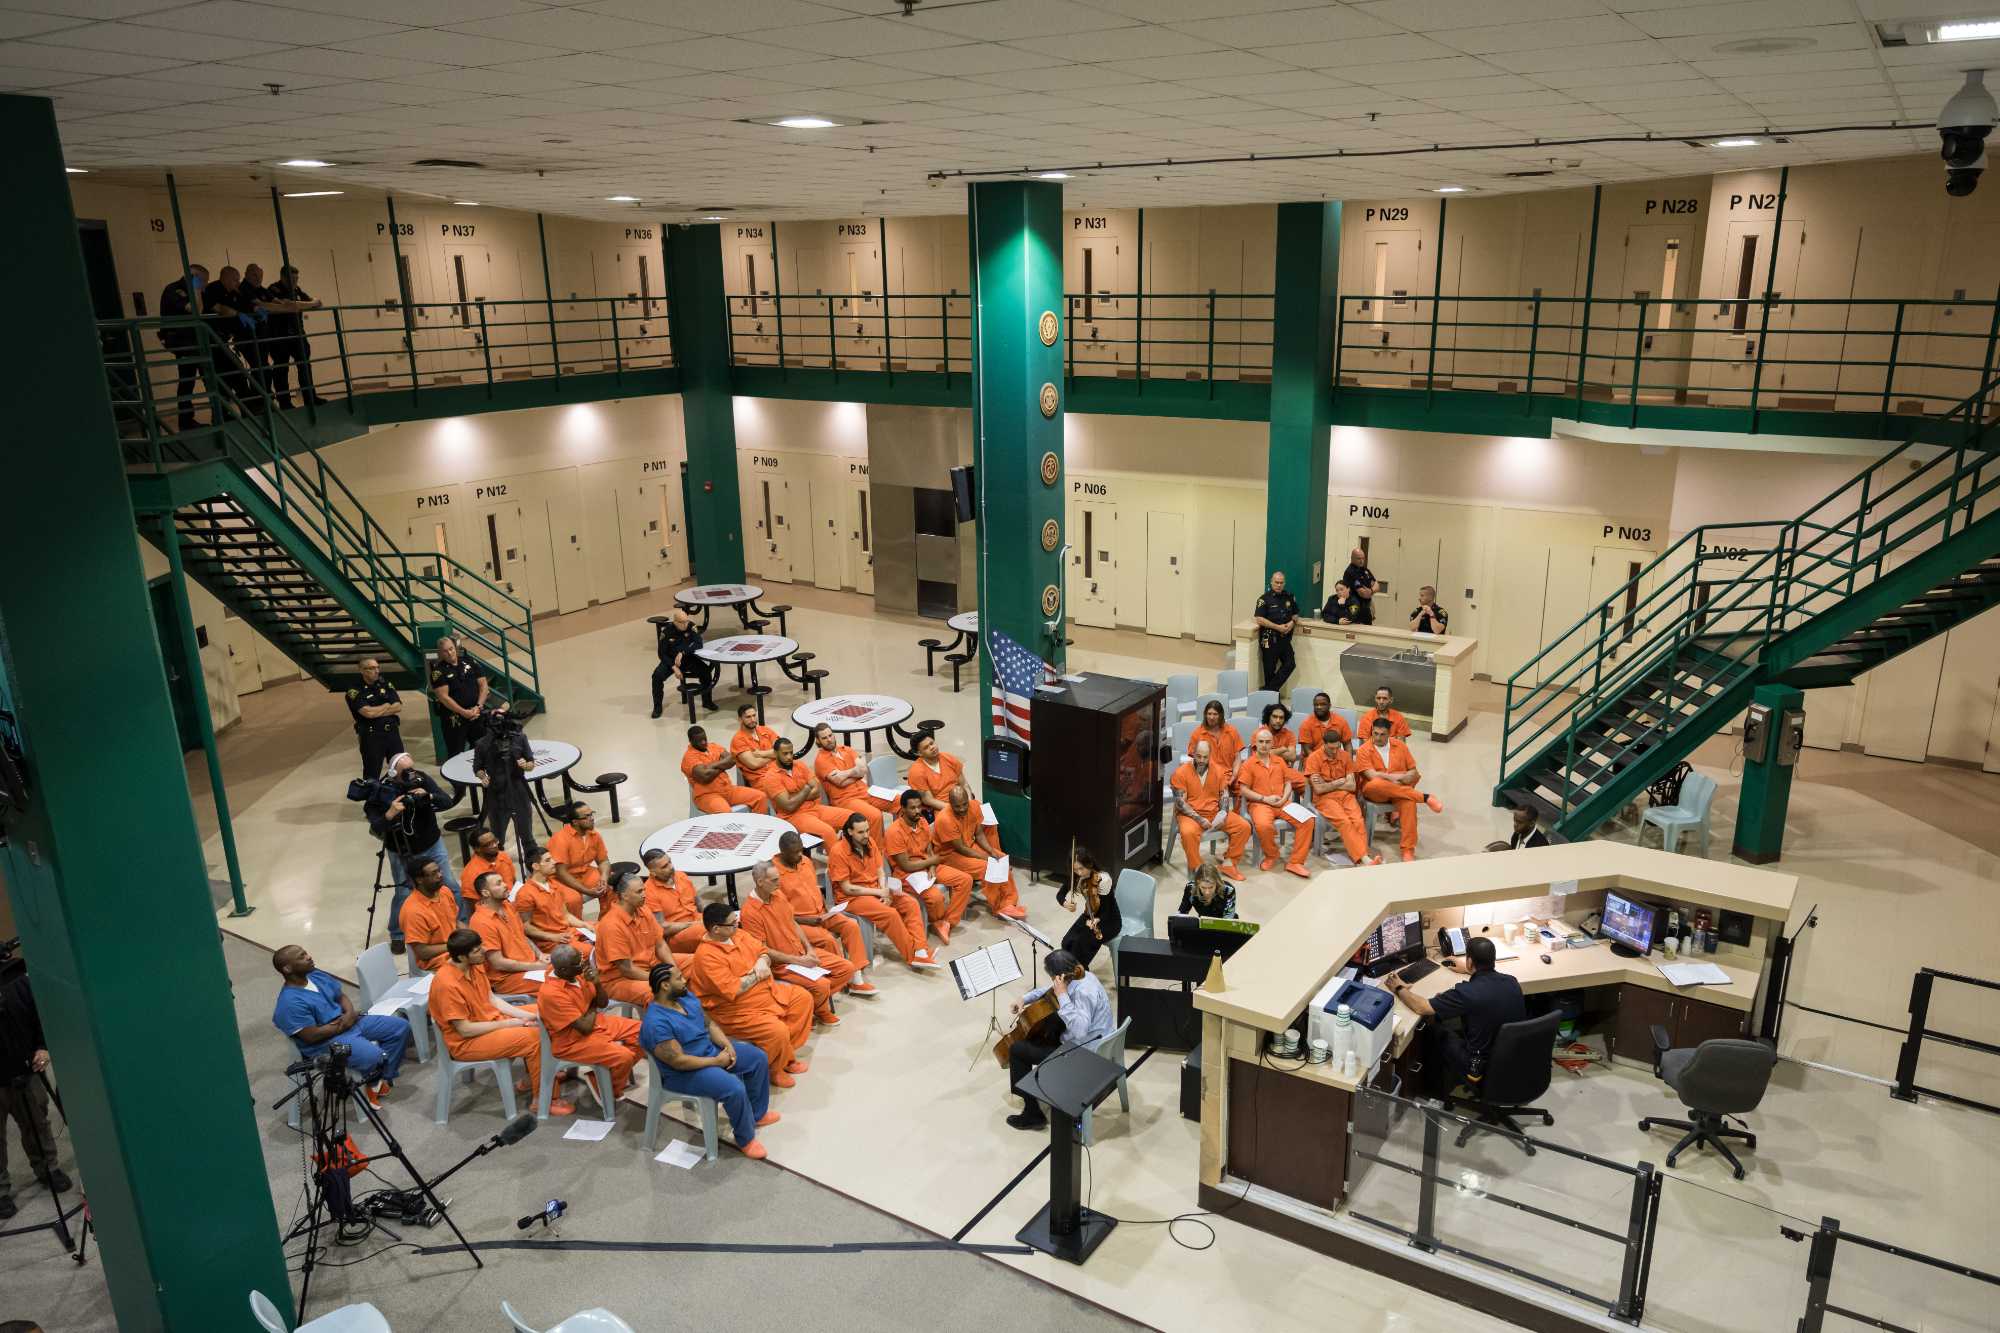 Overhead view of incarcerated people in orange jumpsuits seated for a performance by the ROC City Concerts musicians.